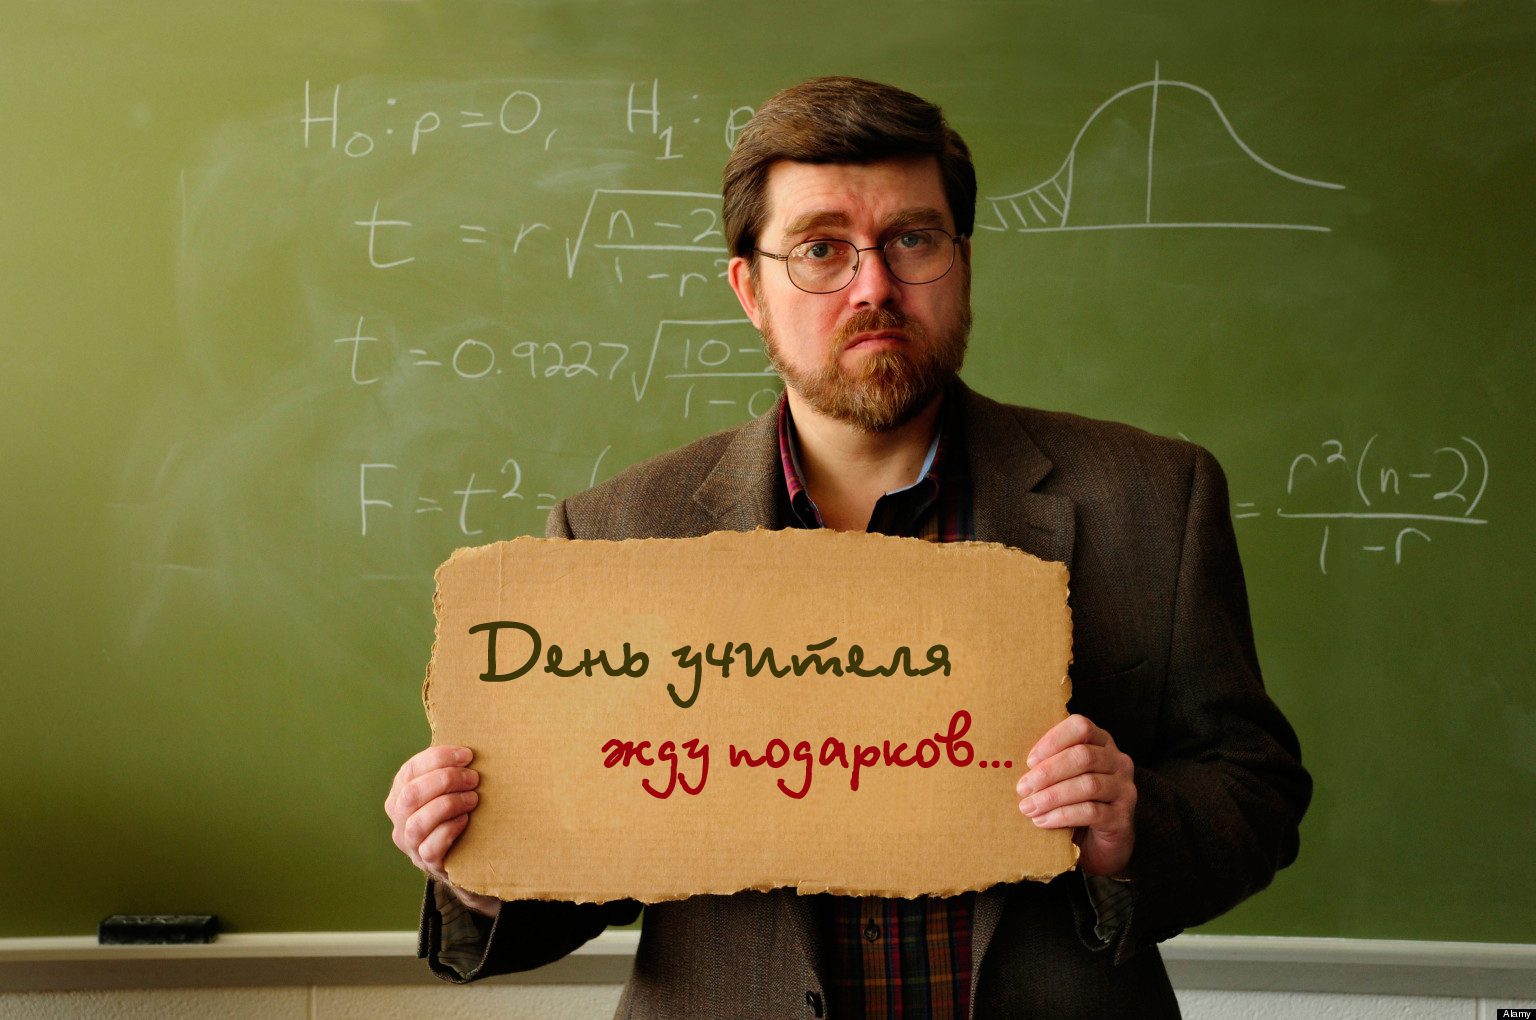 BPGWBA Professor or teacher in classroom holding a "Will Work for Food" sign. Statistical formula on chalkboard in background